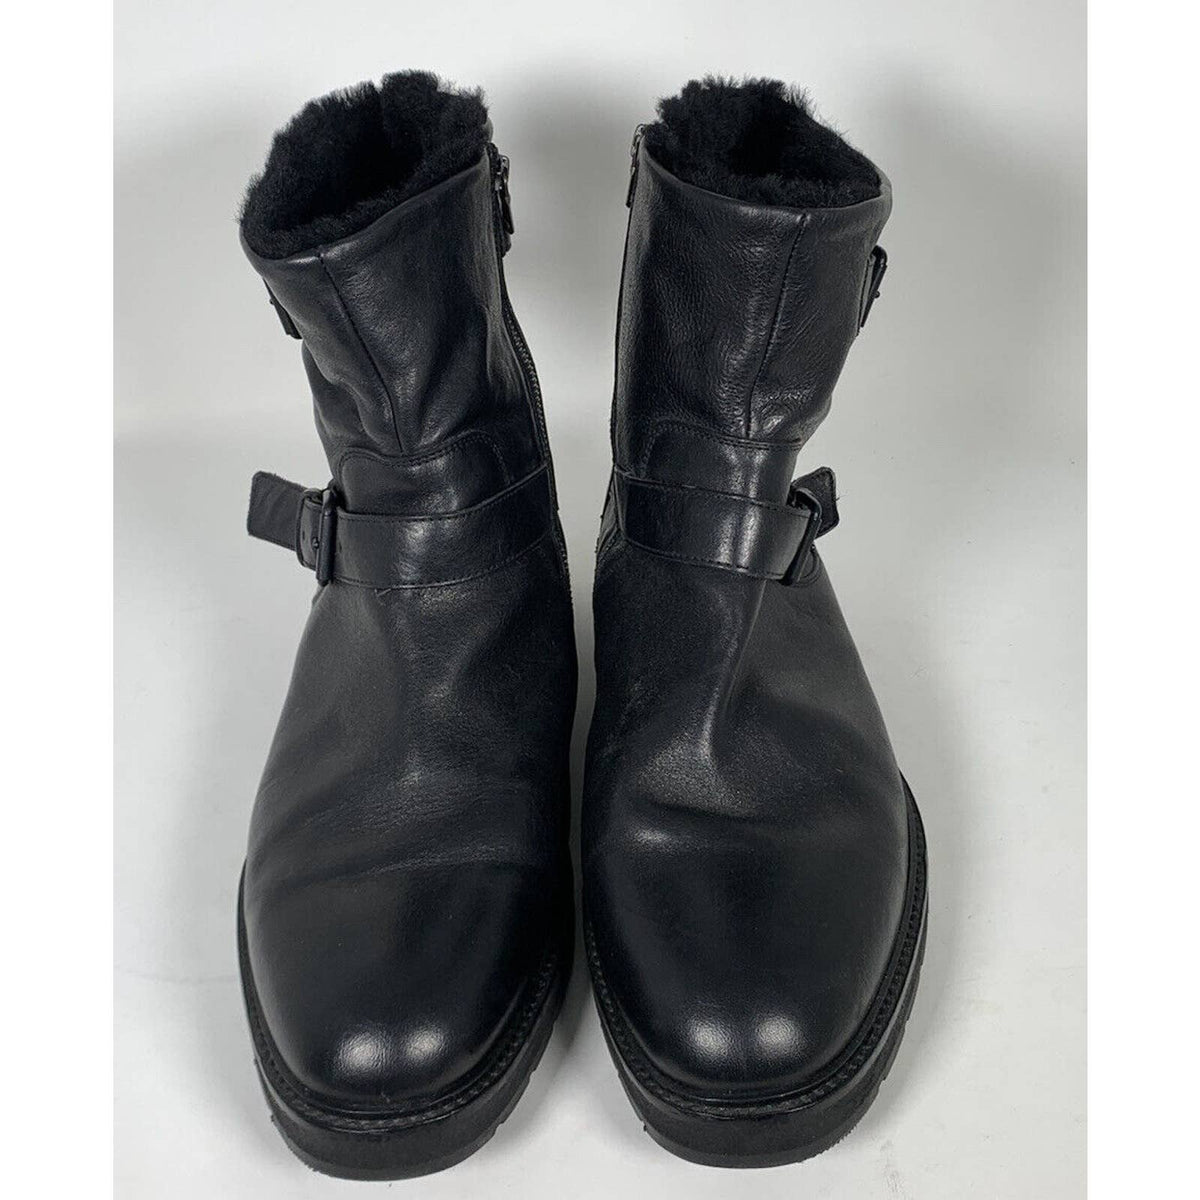 Vince Mens Black Leather Shearling Boots Sz. 12 M